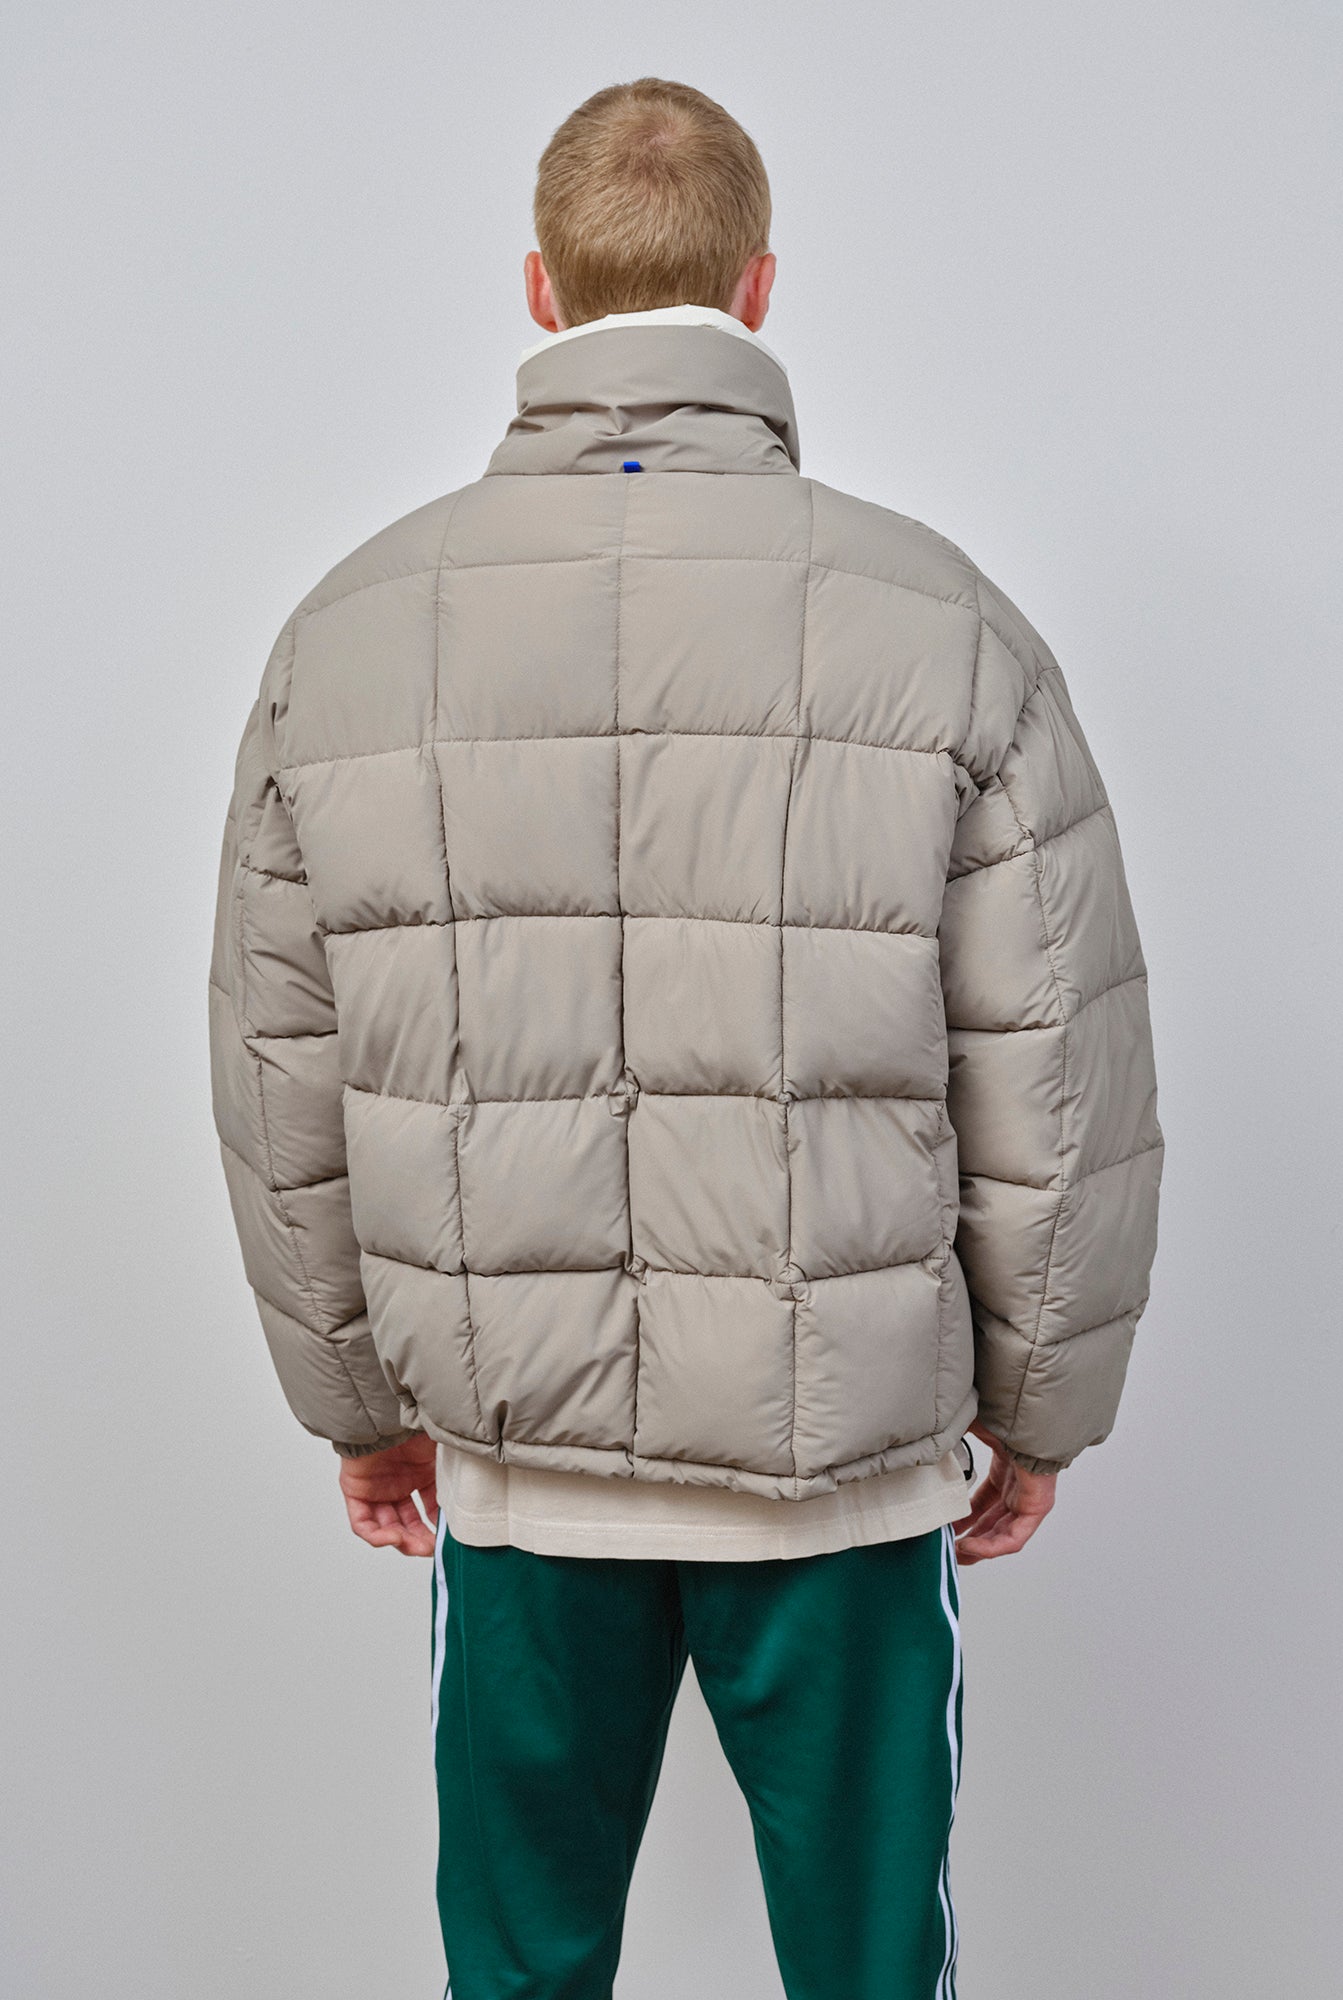 Embassy-of-Bricks-and-Logs-OUTLET-SALE-CAWSTON-PUFFER-JACKET-Jacken-Mantel-ARCHIVE-COLLECTION-3_7d4722e0-3d26-41ee-a179-98924b2e880e.jpg